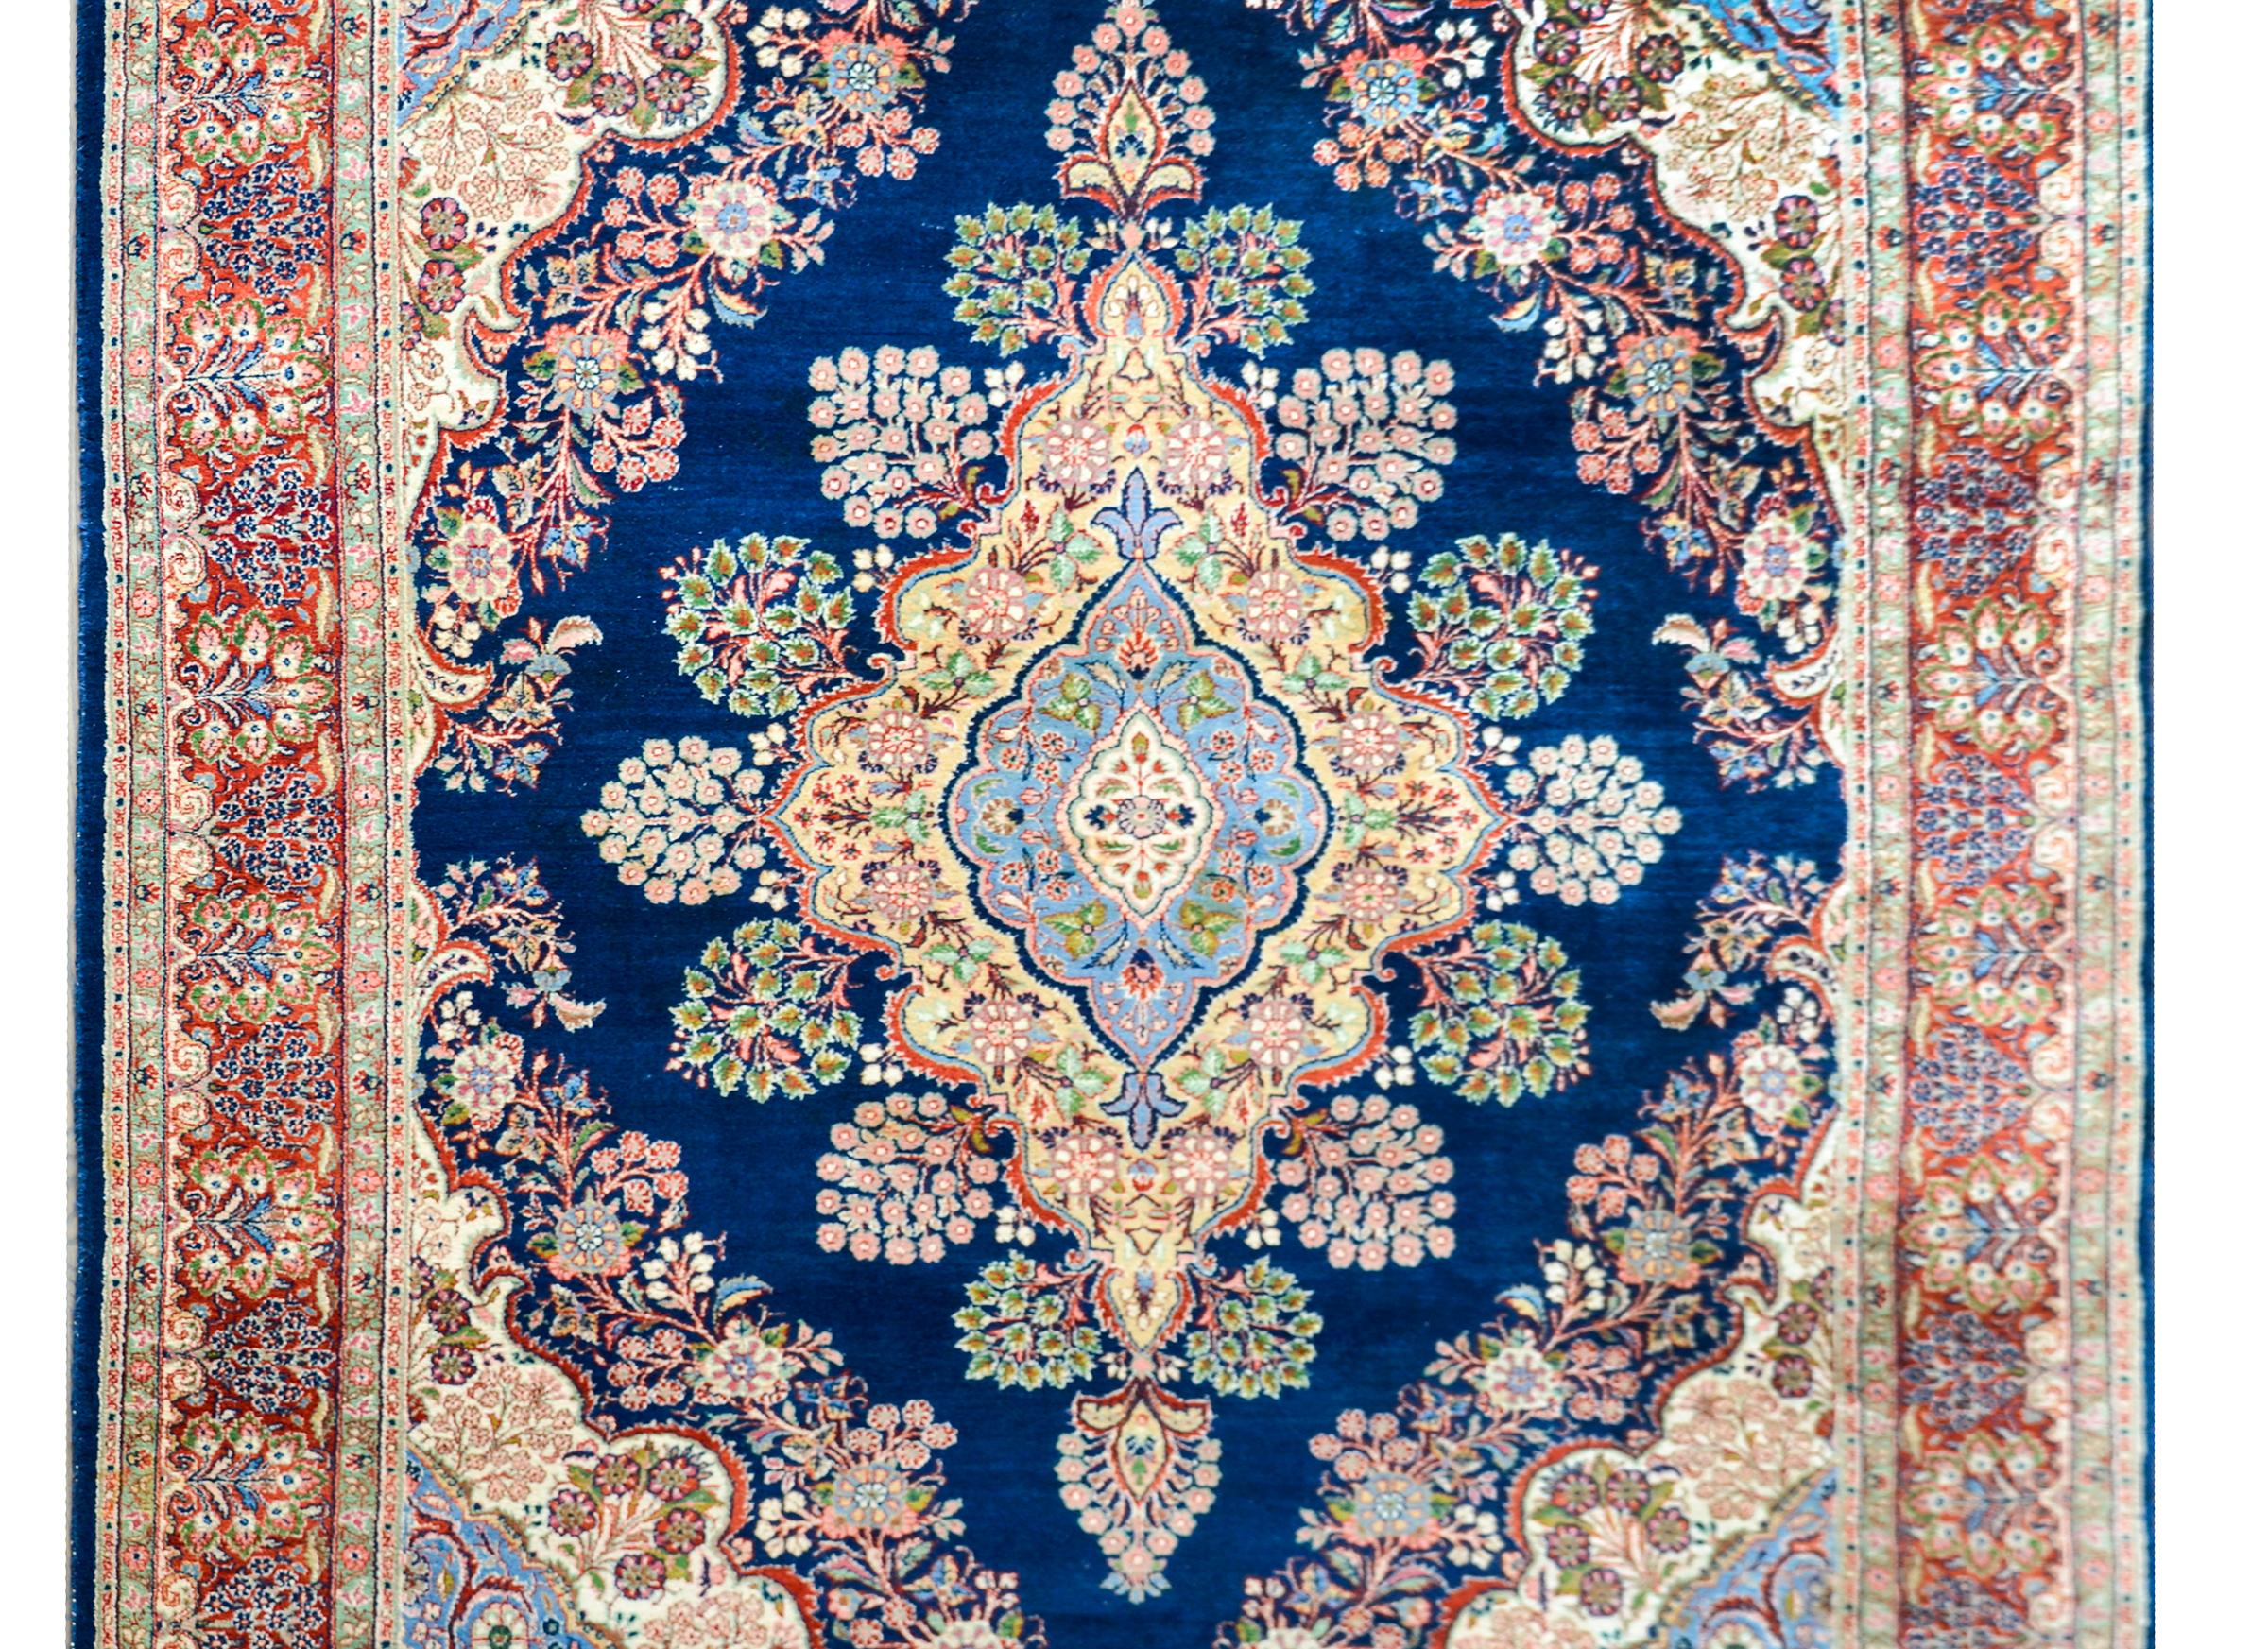 A fantastic 20th century Persian Tabriz rug with a large central floral diamond medallion woven in myriad colors including yellow, green, crimson, pink, and pale indigo, and all set against a dark indigo background. The borer is stunning with a wide